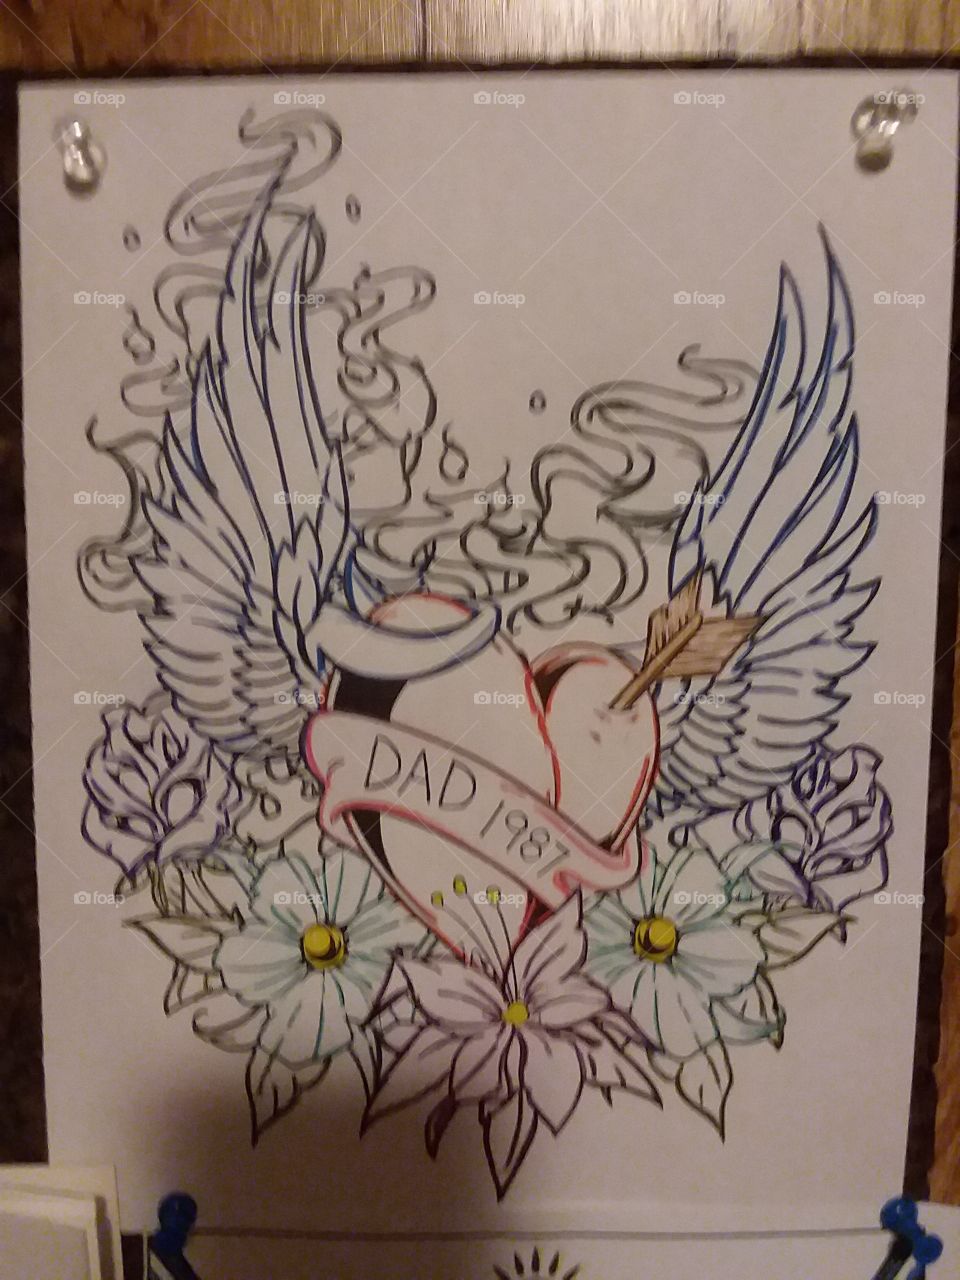 This is a design that would represent the memory of my dad. The heart & wings are him in my mind, the flowers are the beauty of his life.